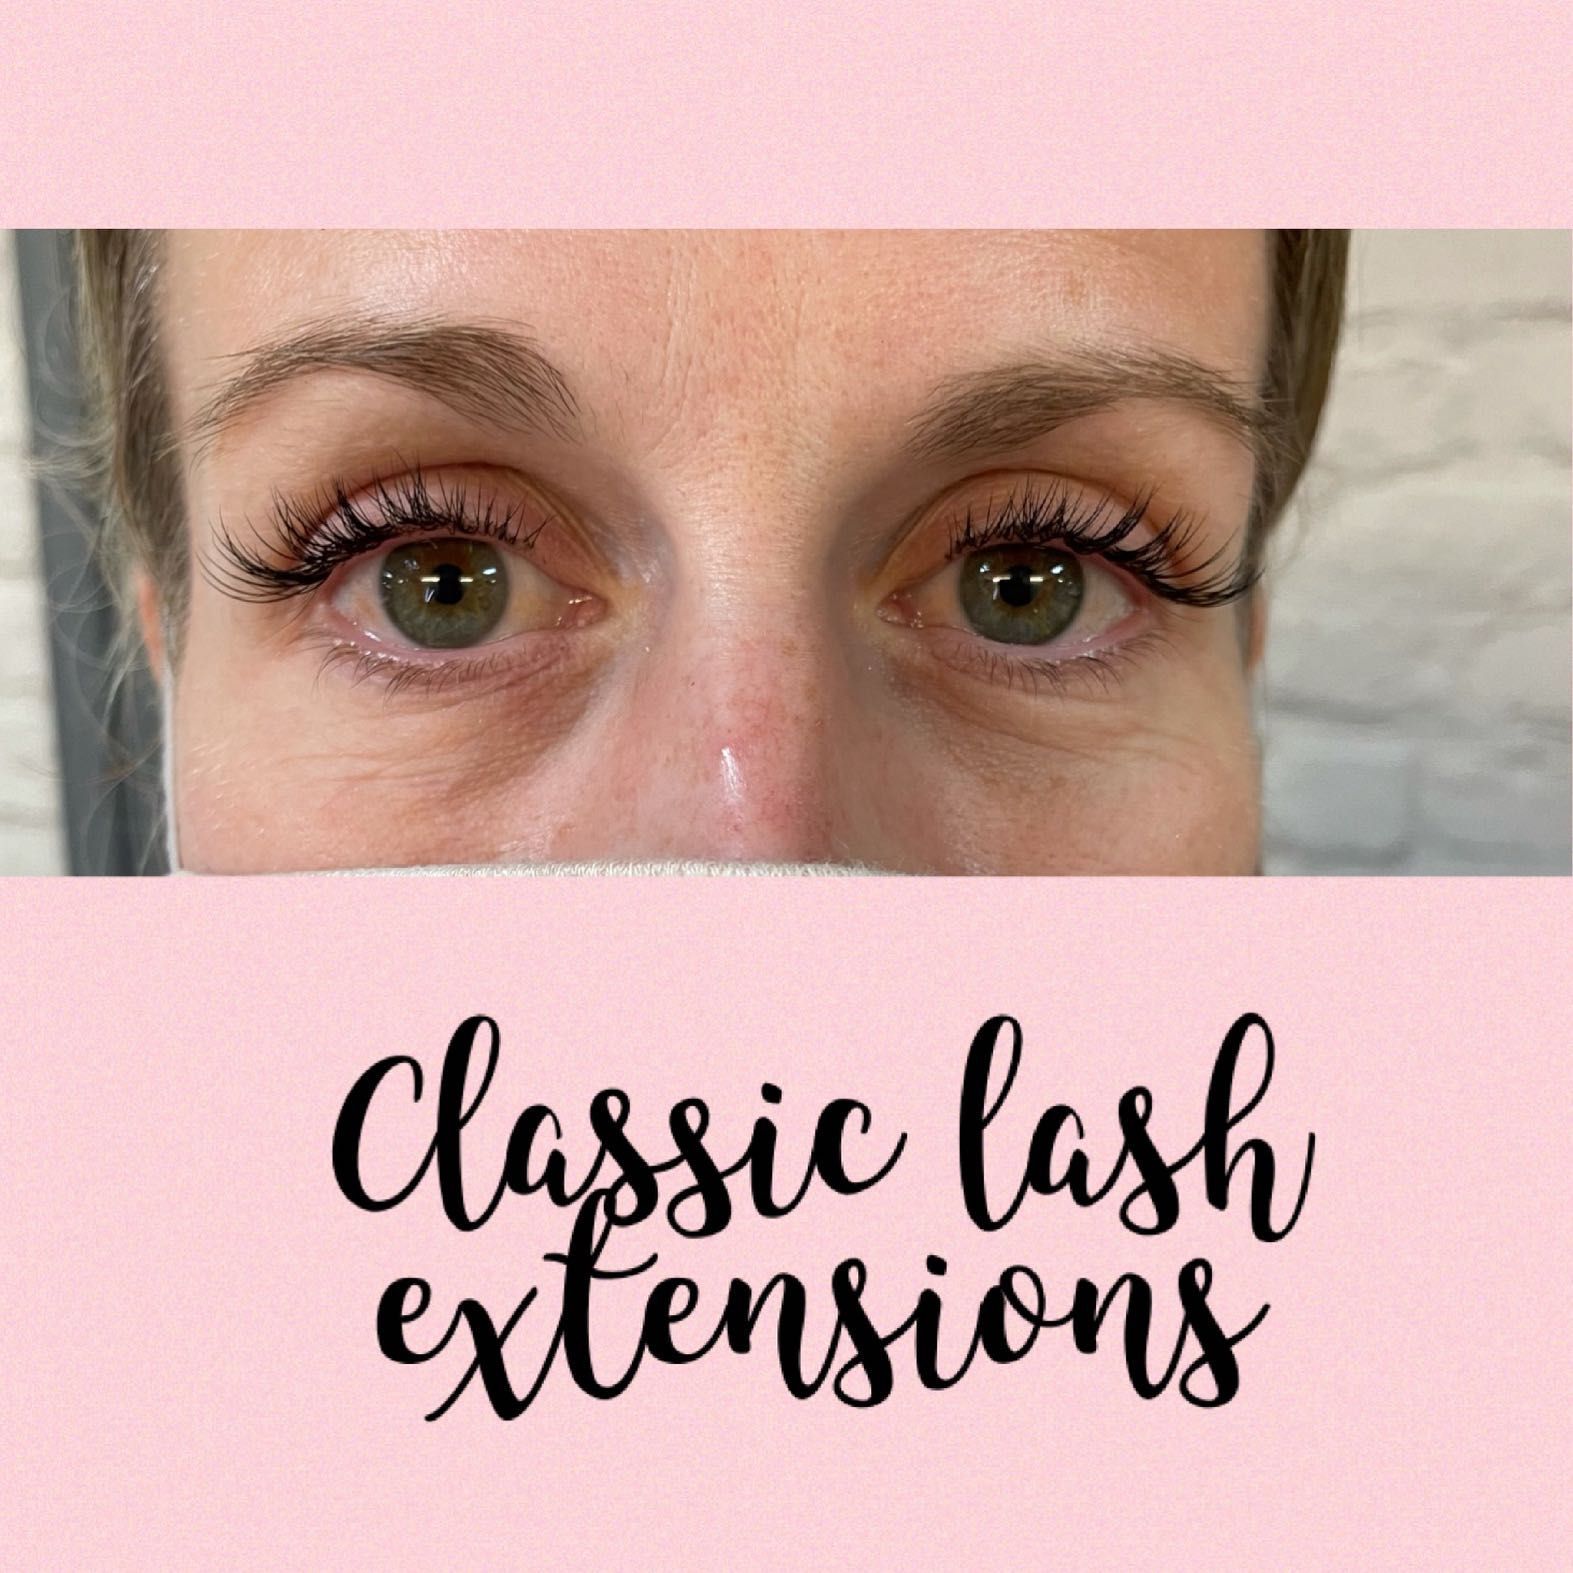 Classic Lash Extensions (£20 off limited offer) portfolio